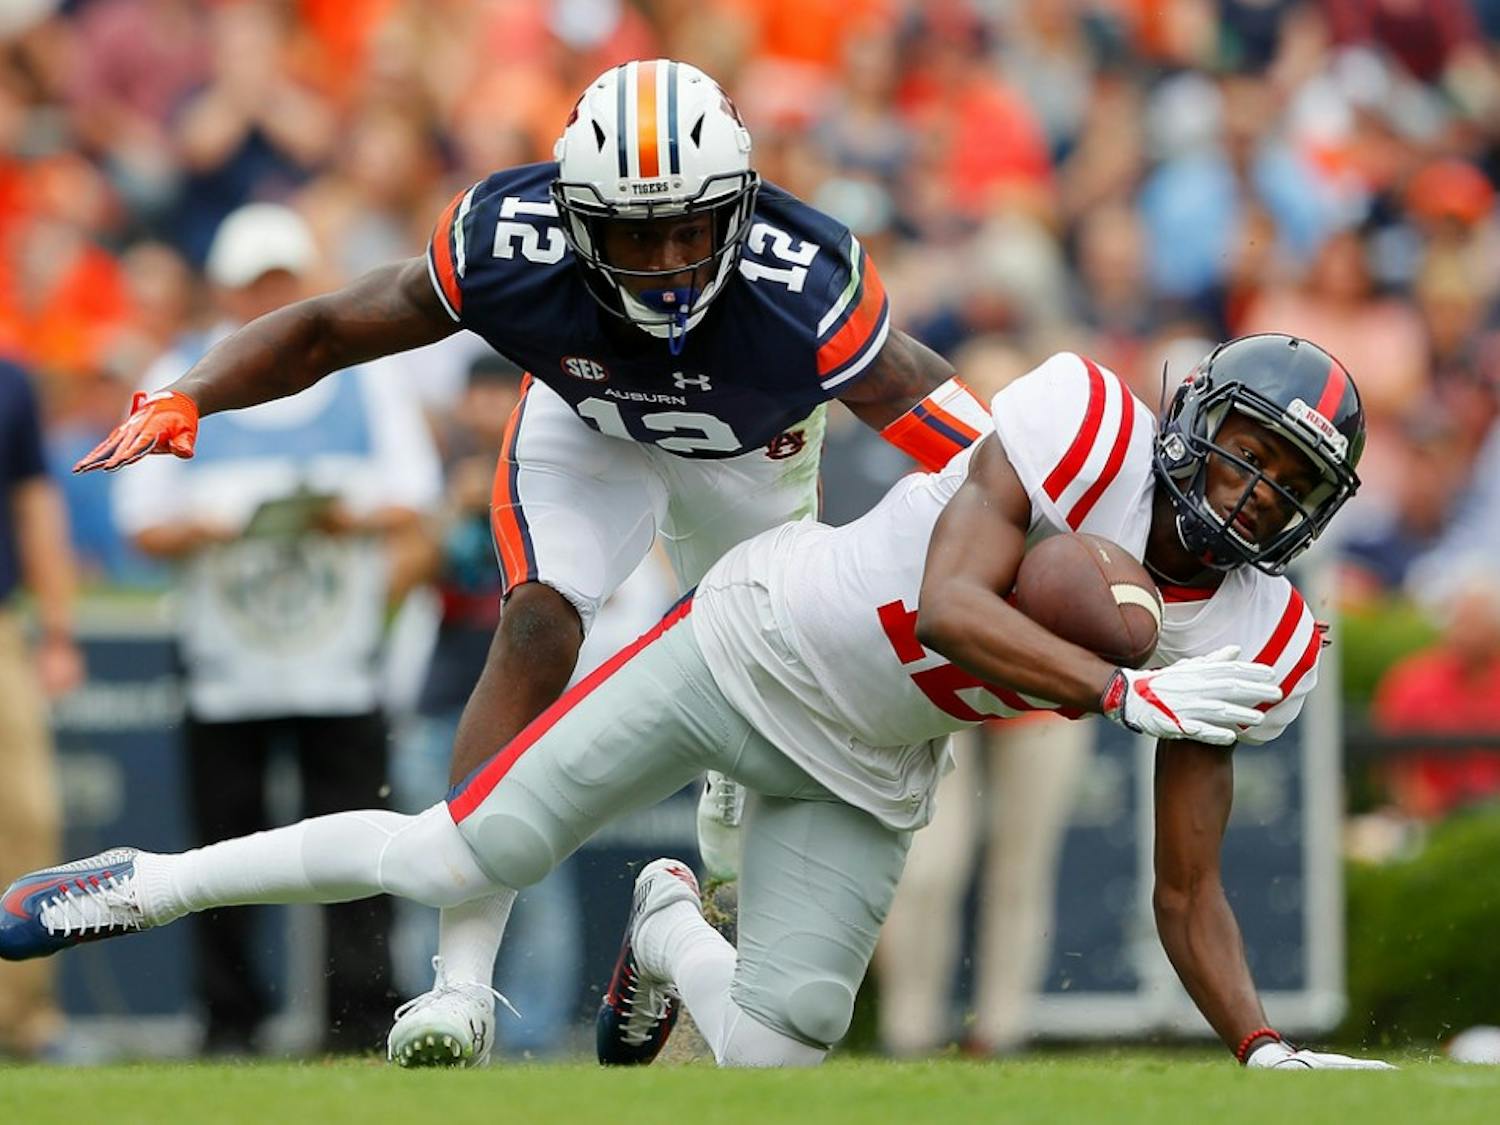 Van Jefferson #12 of the Mississippi Rebels fails to pull in this reception against Jamel Dean #12 of the Auburn Tigers at Jordan Hare Stadium on October 7, 2017 in Auburn, Alabama.